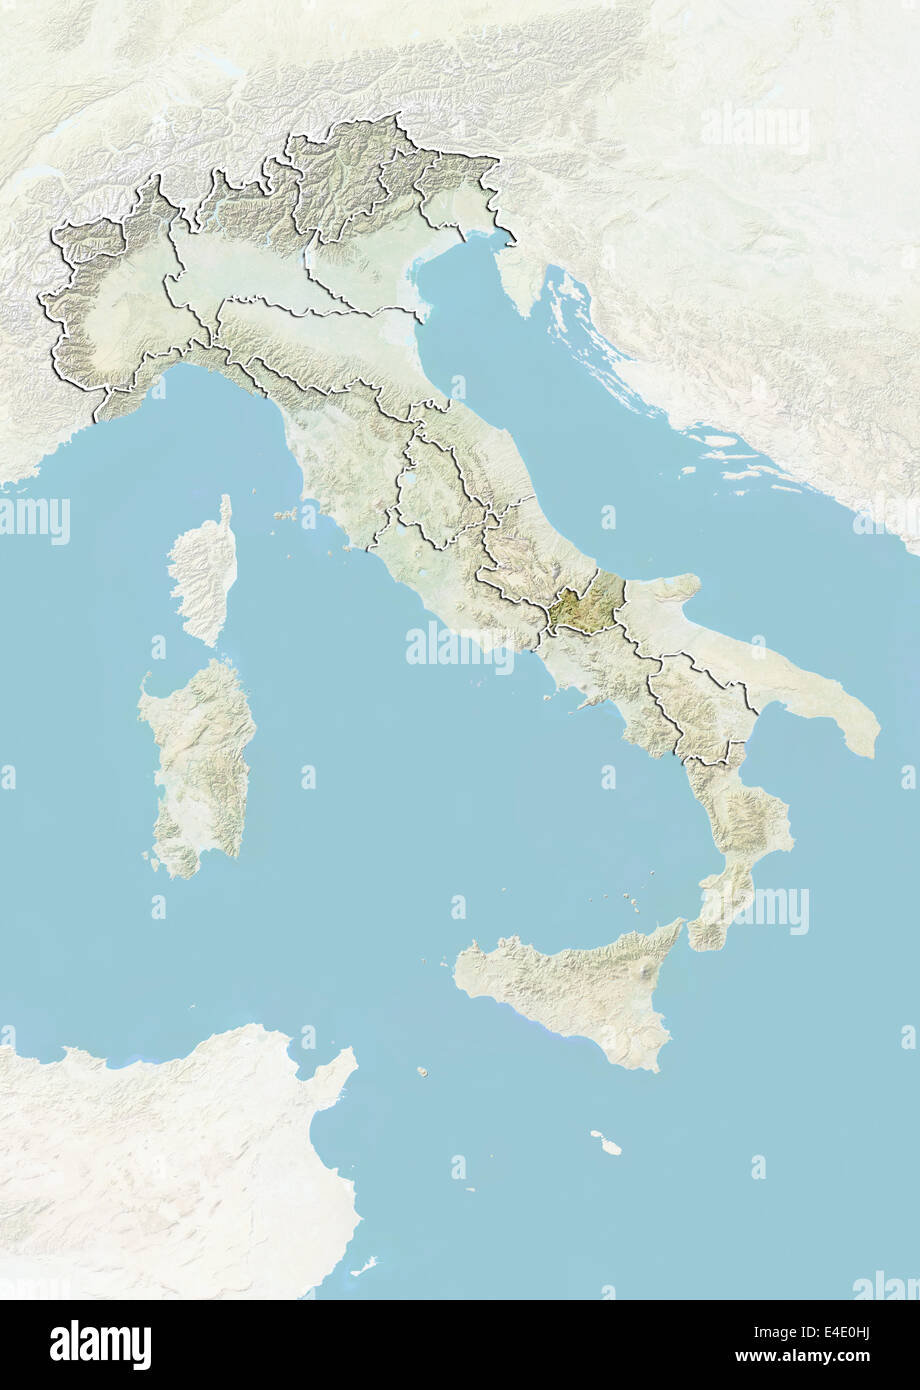 Italy and the Region of Molise, Relief Map Stock Photo